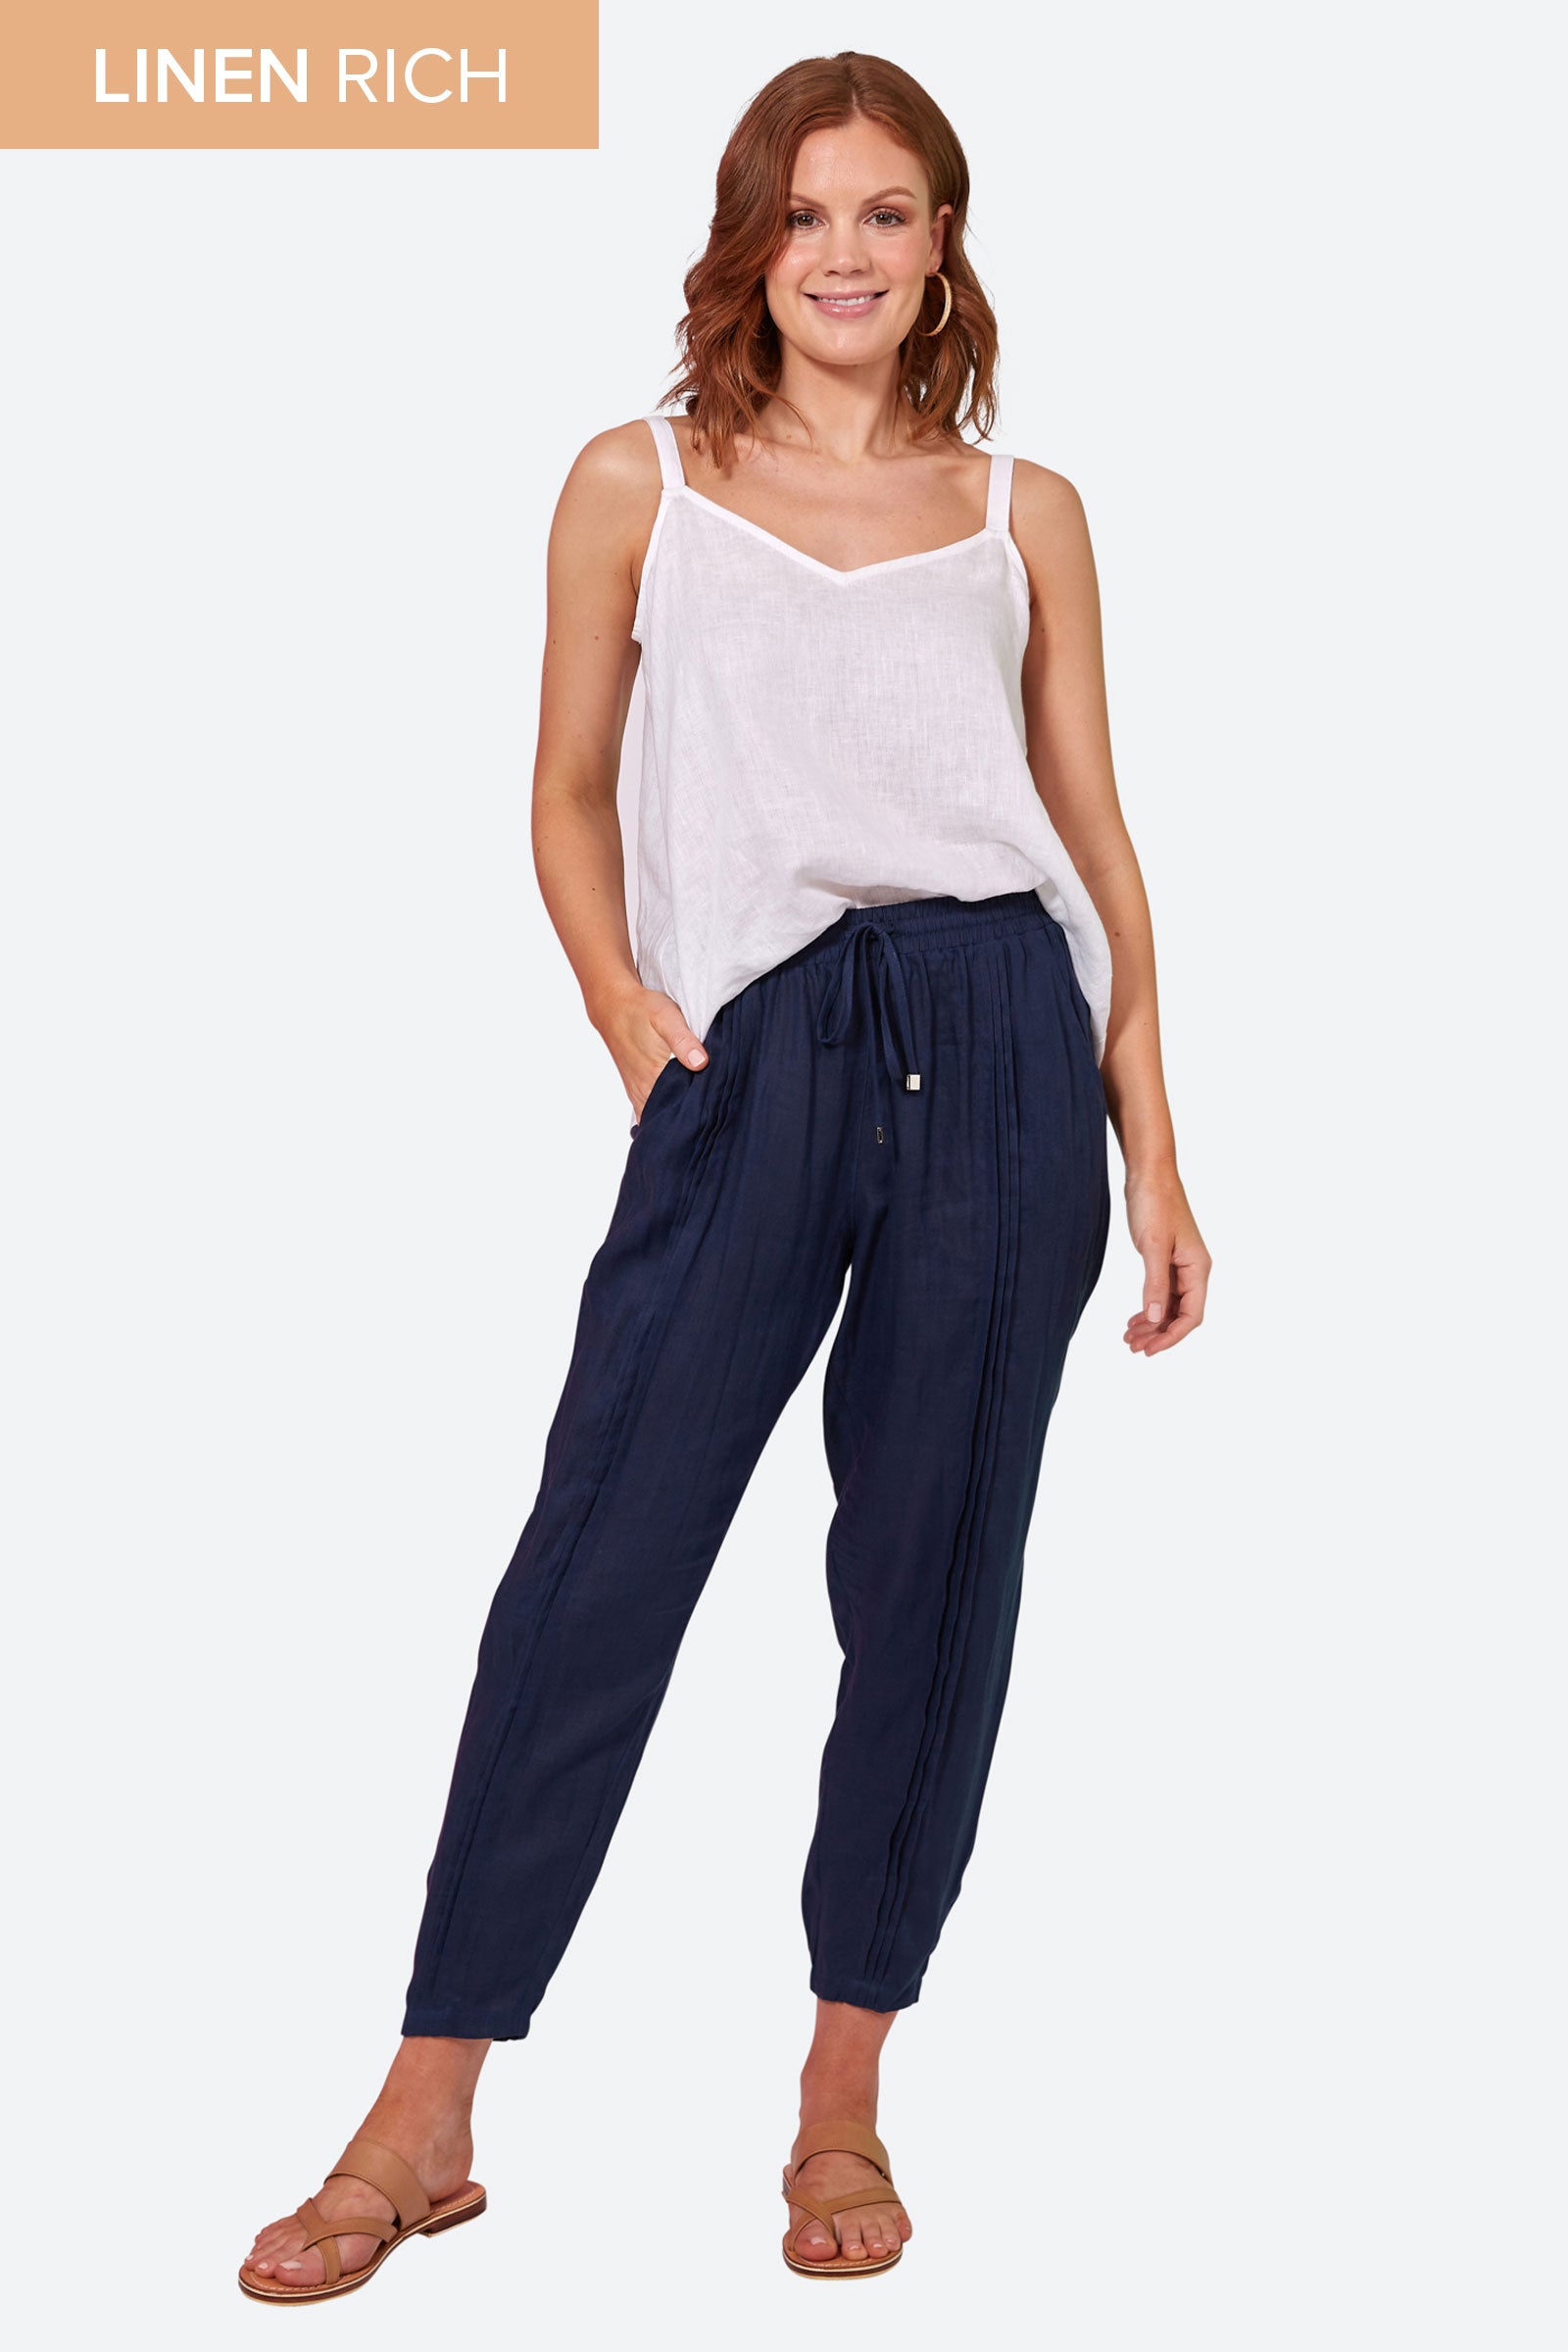 La Vie Pintuck Pant - Sapphire - eb&ive Clothing - Pant Relaxed Linen